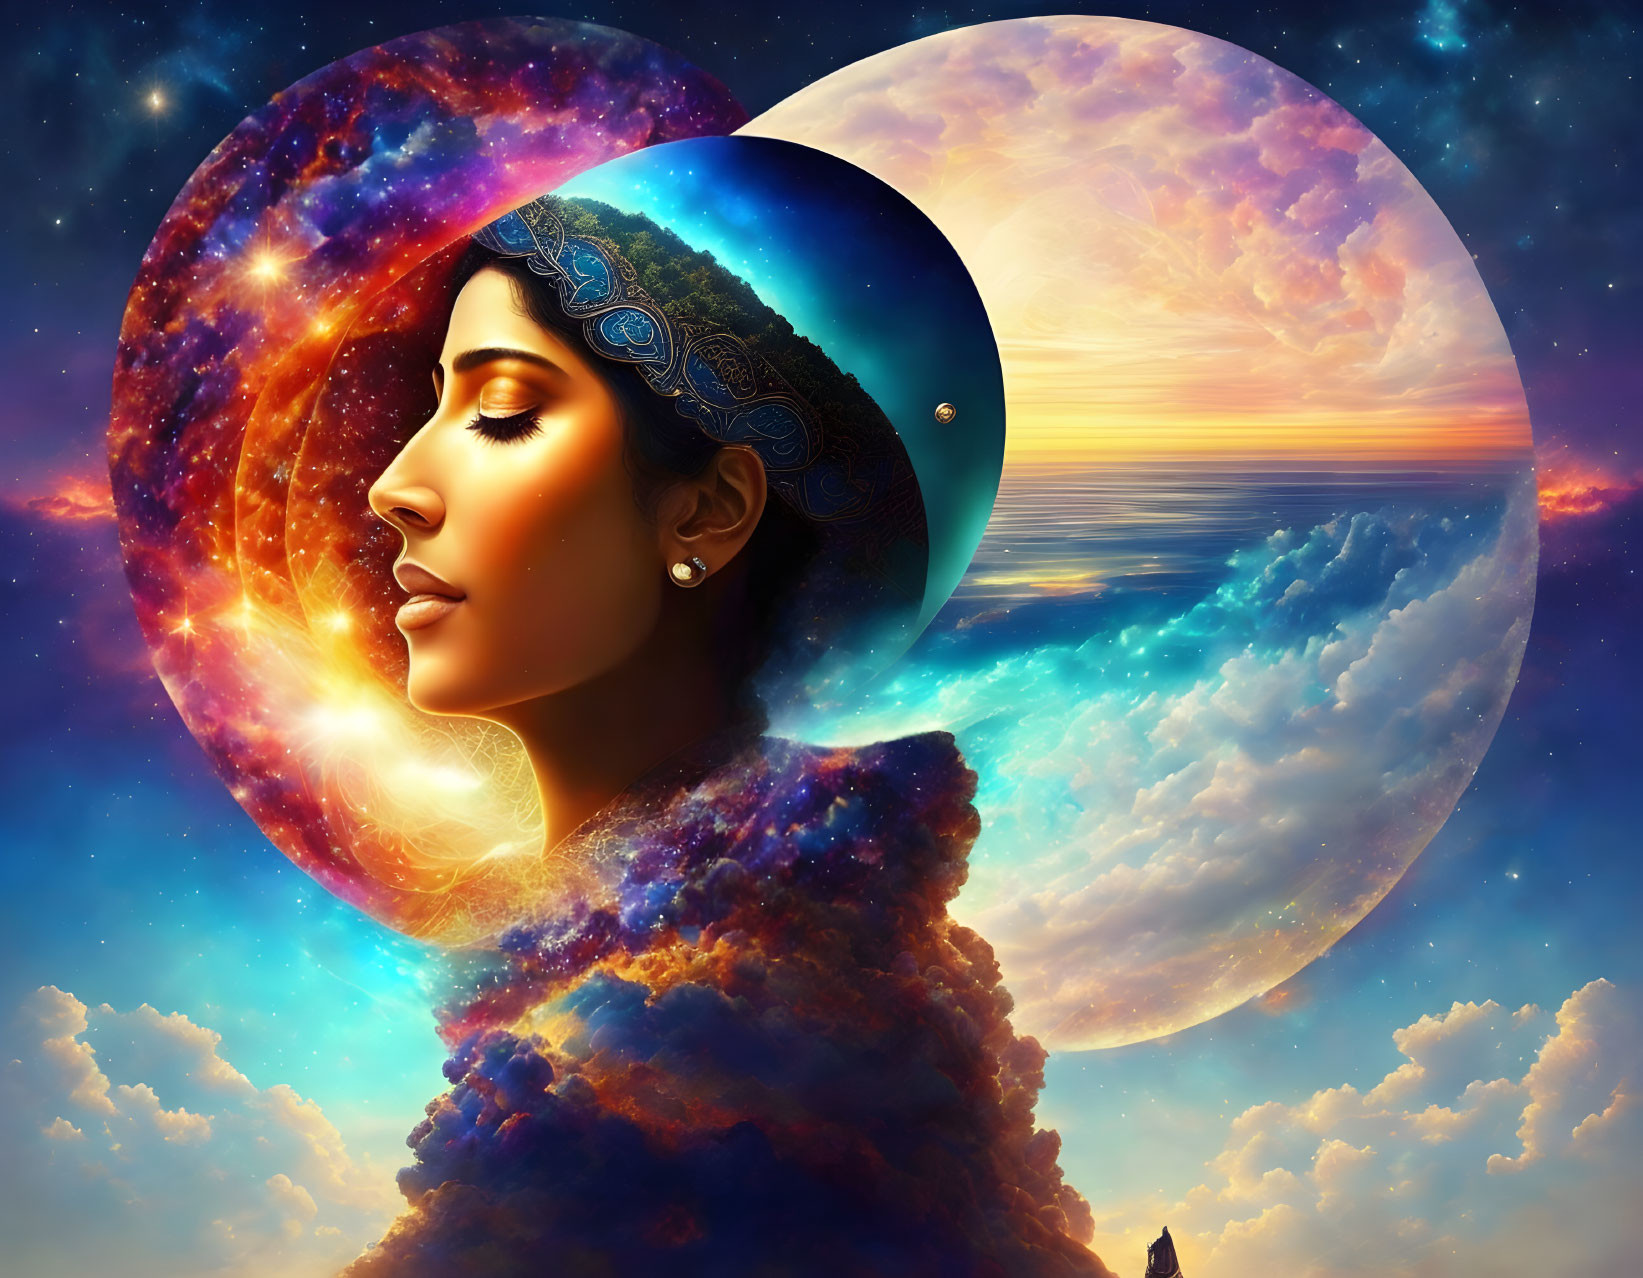 Surreal cosmic sunset blending with woman's profile